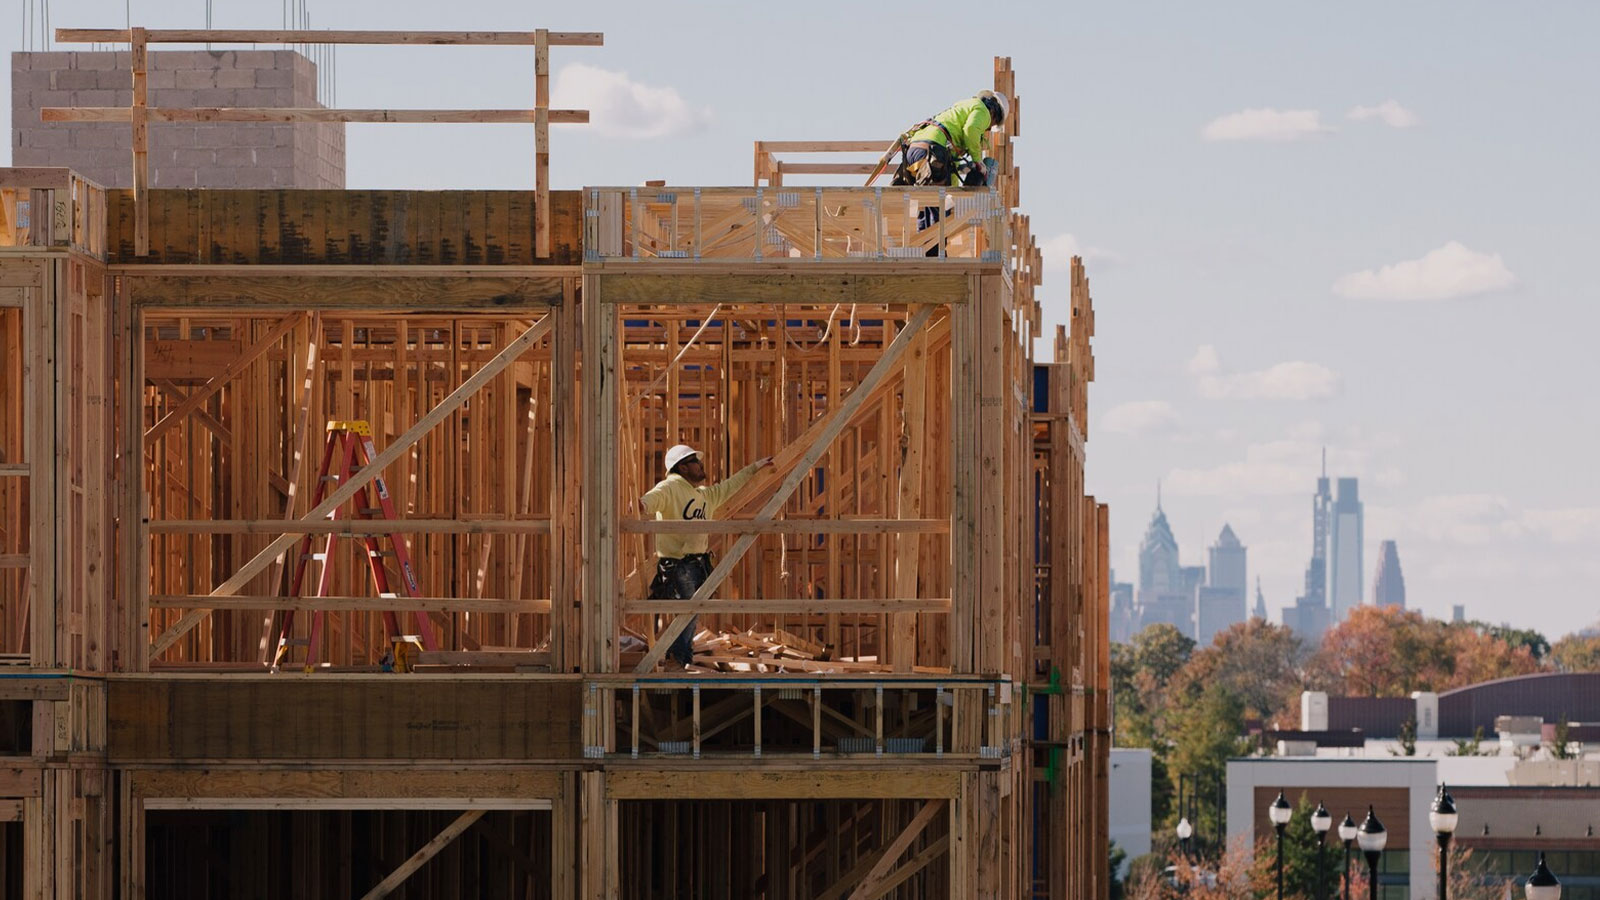 Construction workers in Cherry Hill, N.J., with the Philadelphia skyline in the distance.